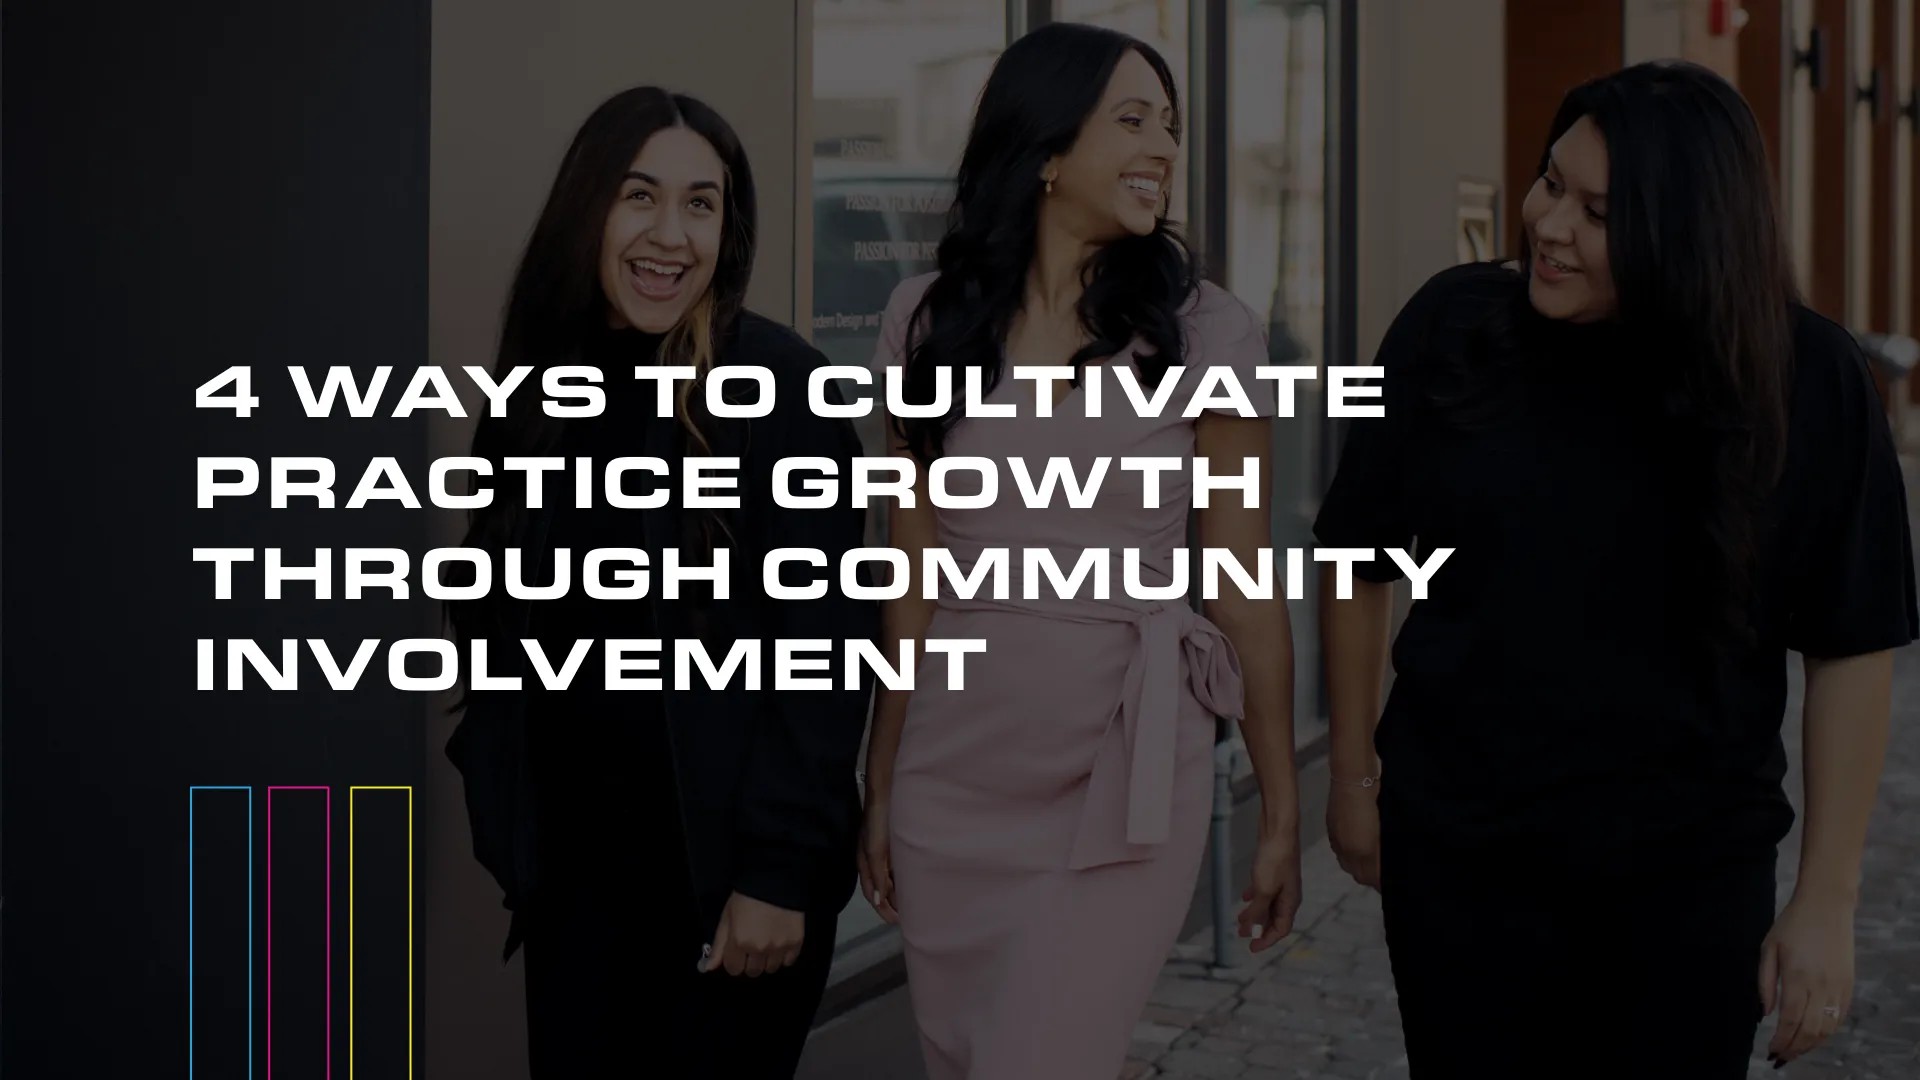 4 Ways to Cultivate Practice Growth Through Community Involvement 